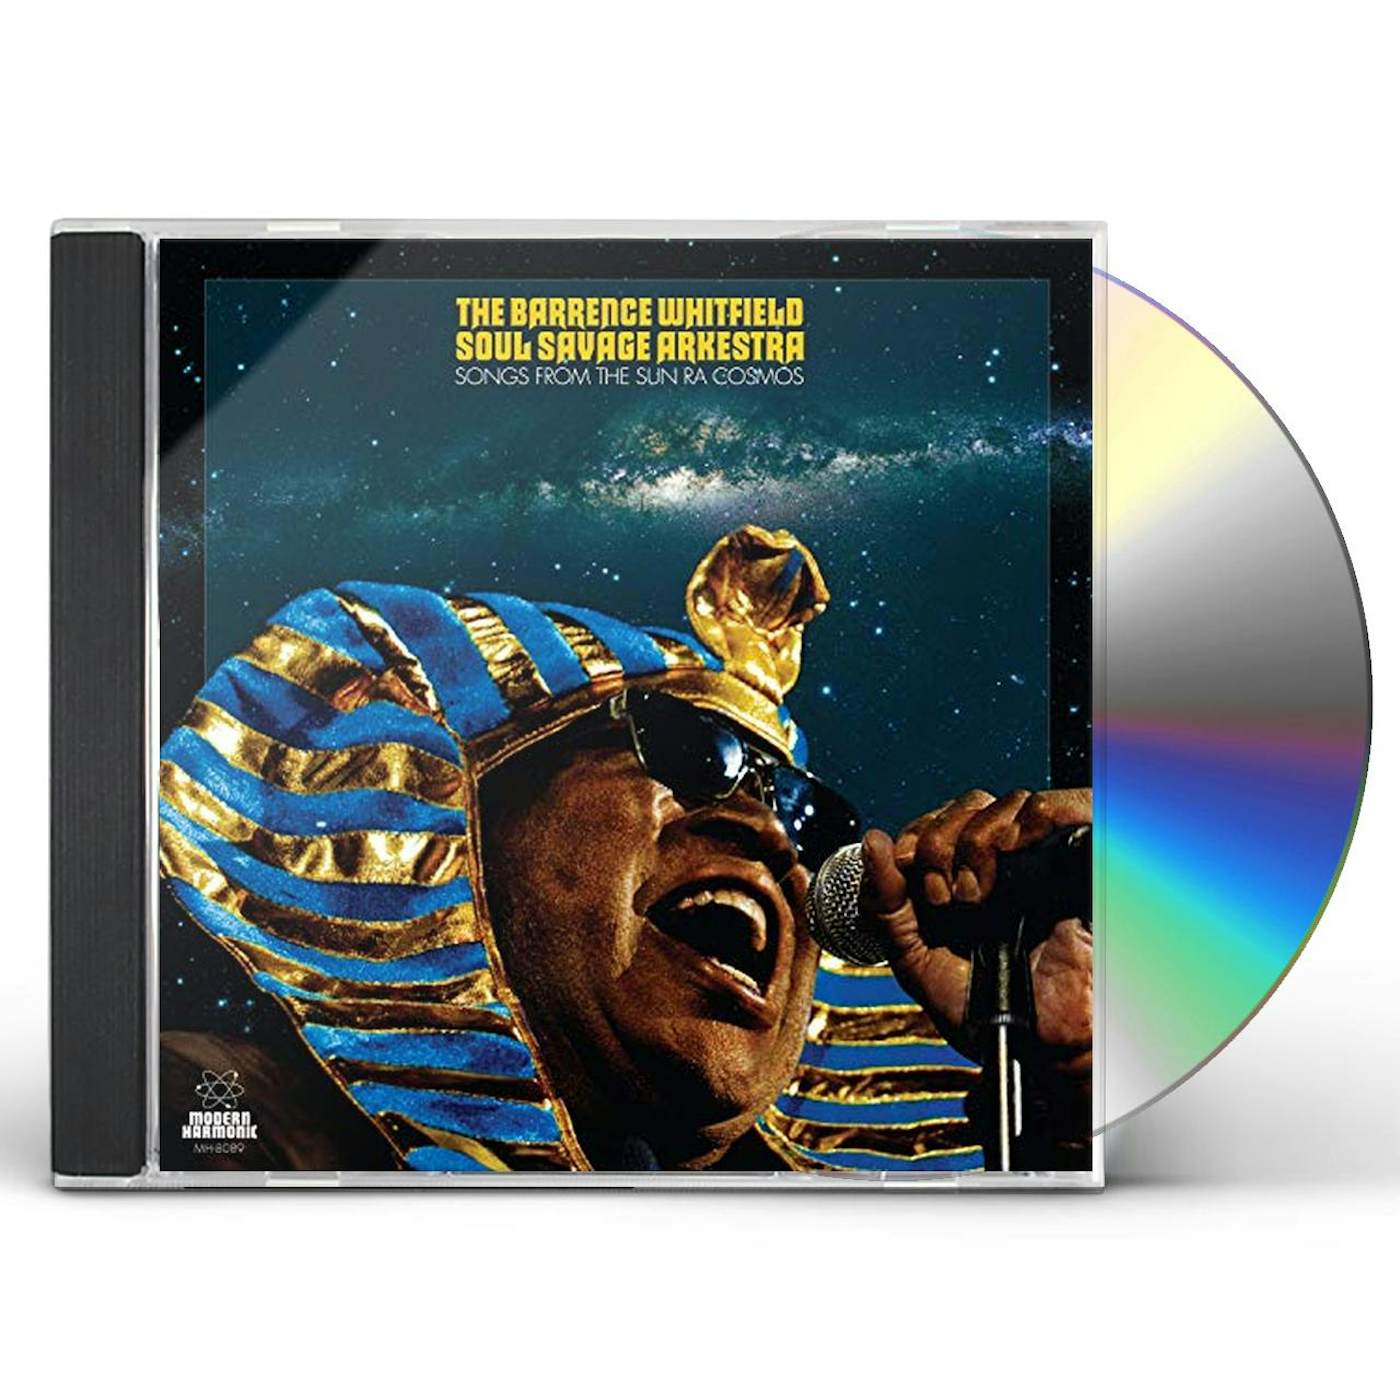 Barrence Whitfield & The Savages SONGS FROM THE SUN RA COSMOS CD